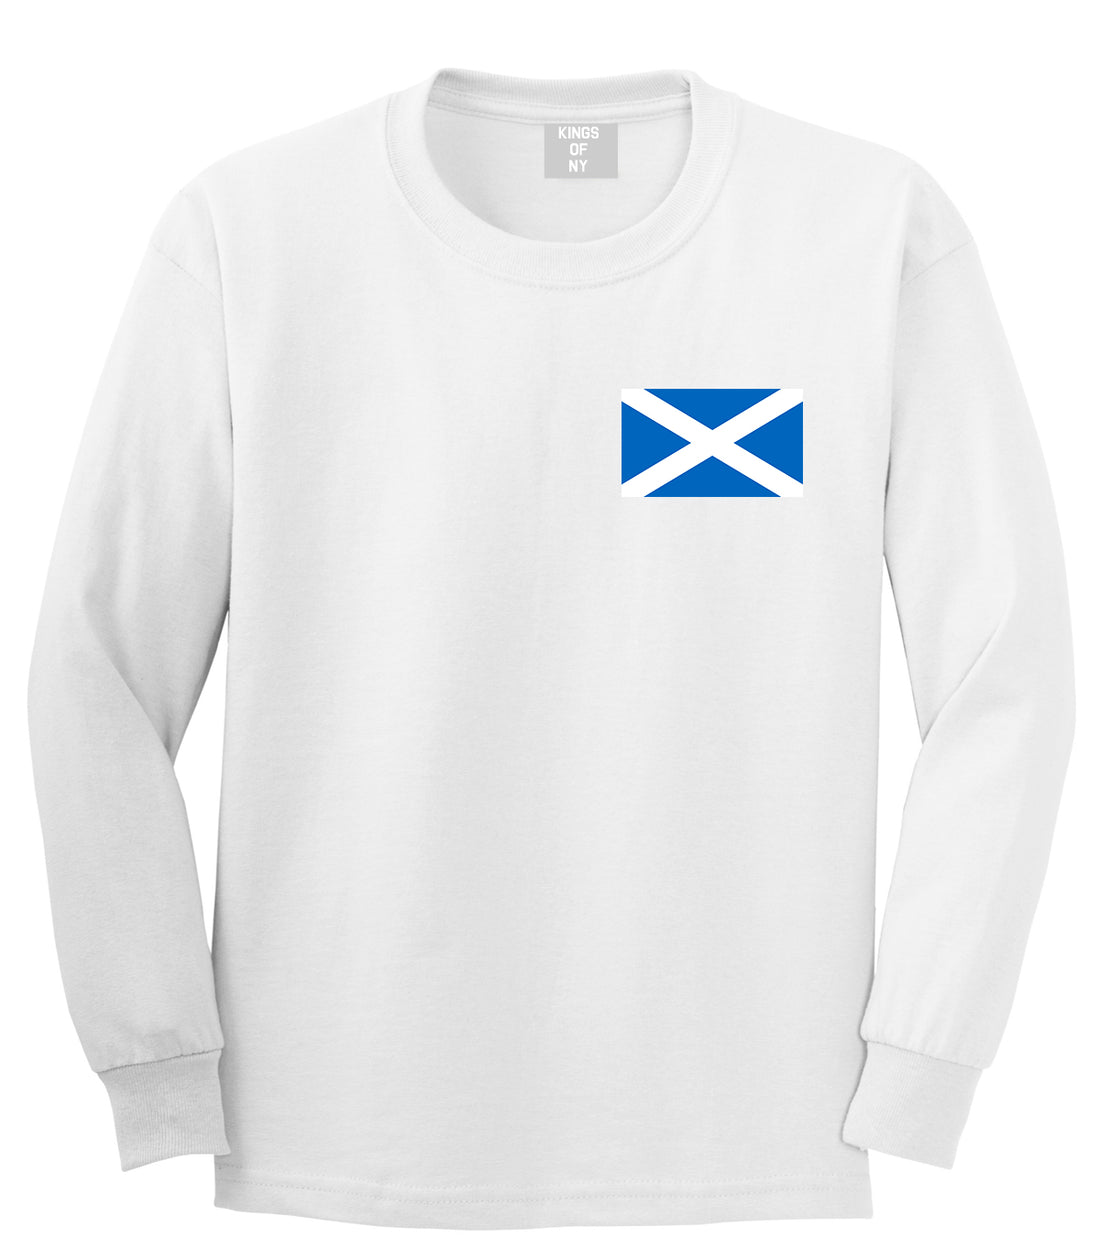 Scotland Flag Country Chest White Long Sleeve T-Shirt by Kings Of NY